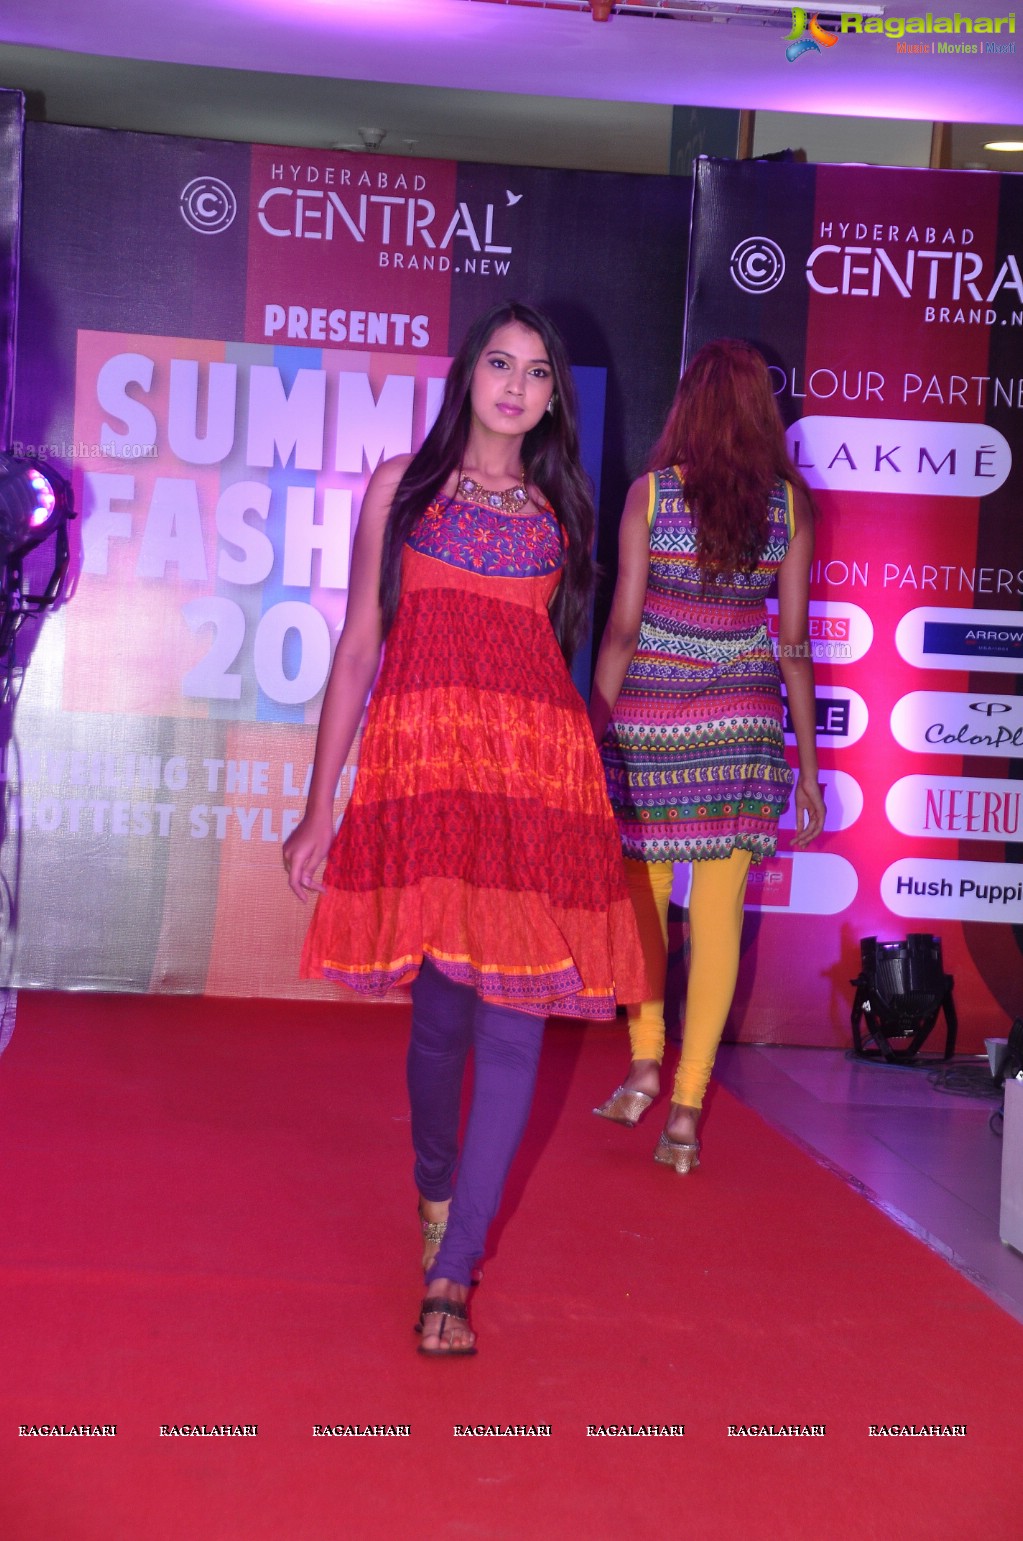 Trendy Fashion Show and Summer Collection 2013 at Hyderabad Central